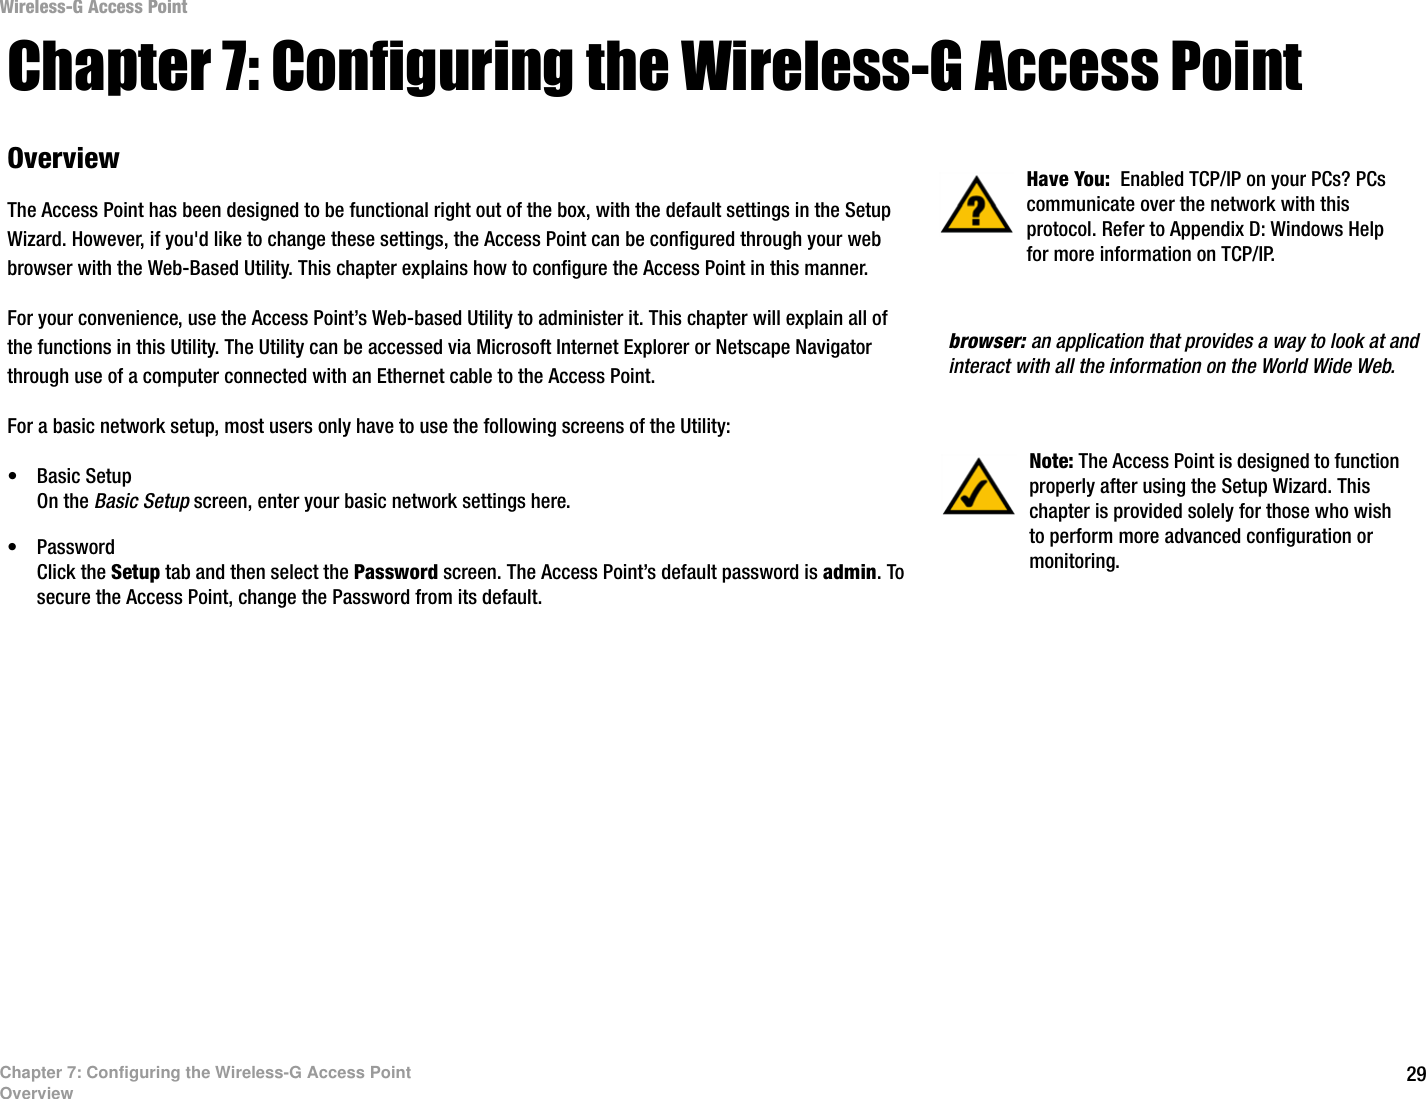 Wireless-G Access Point Chapter 7: Configuring the Wireless-G Access Point Overview  Have You:  Enabled TCP/IP on your PCs? PCs communicate over the network with this The Access Point has been designed to be functional right out of the box, with the default settings in the Setup protocol. Refer to Appendix D: Windows Help Wizard. However, if you&apos;d like to change these settings, the Access Point can be configured through your web  for more information on TCP/IP. browser with the Web-Based Utility. This chapter explains how to configure the Access Point in this manner. For your convenience, use the Access Point’s Web-based Utility to administer it. This chapter will explain all of the functions in this Utility. The Utility can be accessed via Microsoft Internet Explorer or Netscape Navigator  browser: an application that provides a way to look at and through use of a computer connected with an Ethernet cable to the Access Point.  interact with all the information on the World Wide Web. For a basic network setup, most users only have to use the following screens of the Utility: Note: The Access Point is designed to function  •  Basic Setup  properly after using the Setup Wizard. This On the Basic Setup screen, enter your basic network settings here.  chapter is provided solely for those who wish •  Password  to perform more advanced configuration or Click the Setup tab and then select the Password screen. The Access Point’s default password is admin. To  monitoring. secure the Access Point, change the Password from its default. Chapter 7: Configuring the Wireless-G Access Point Overview  29 